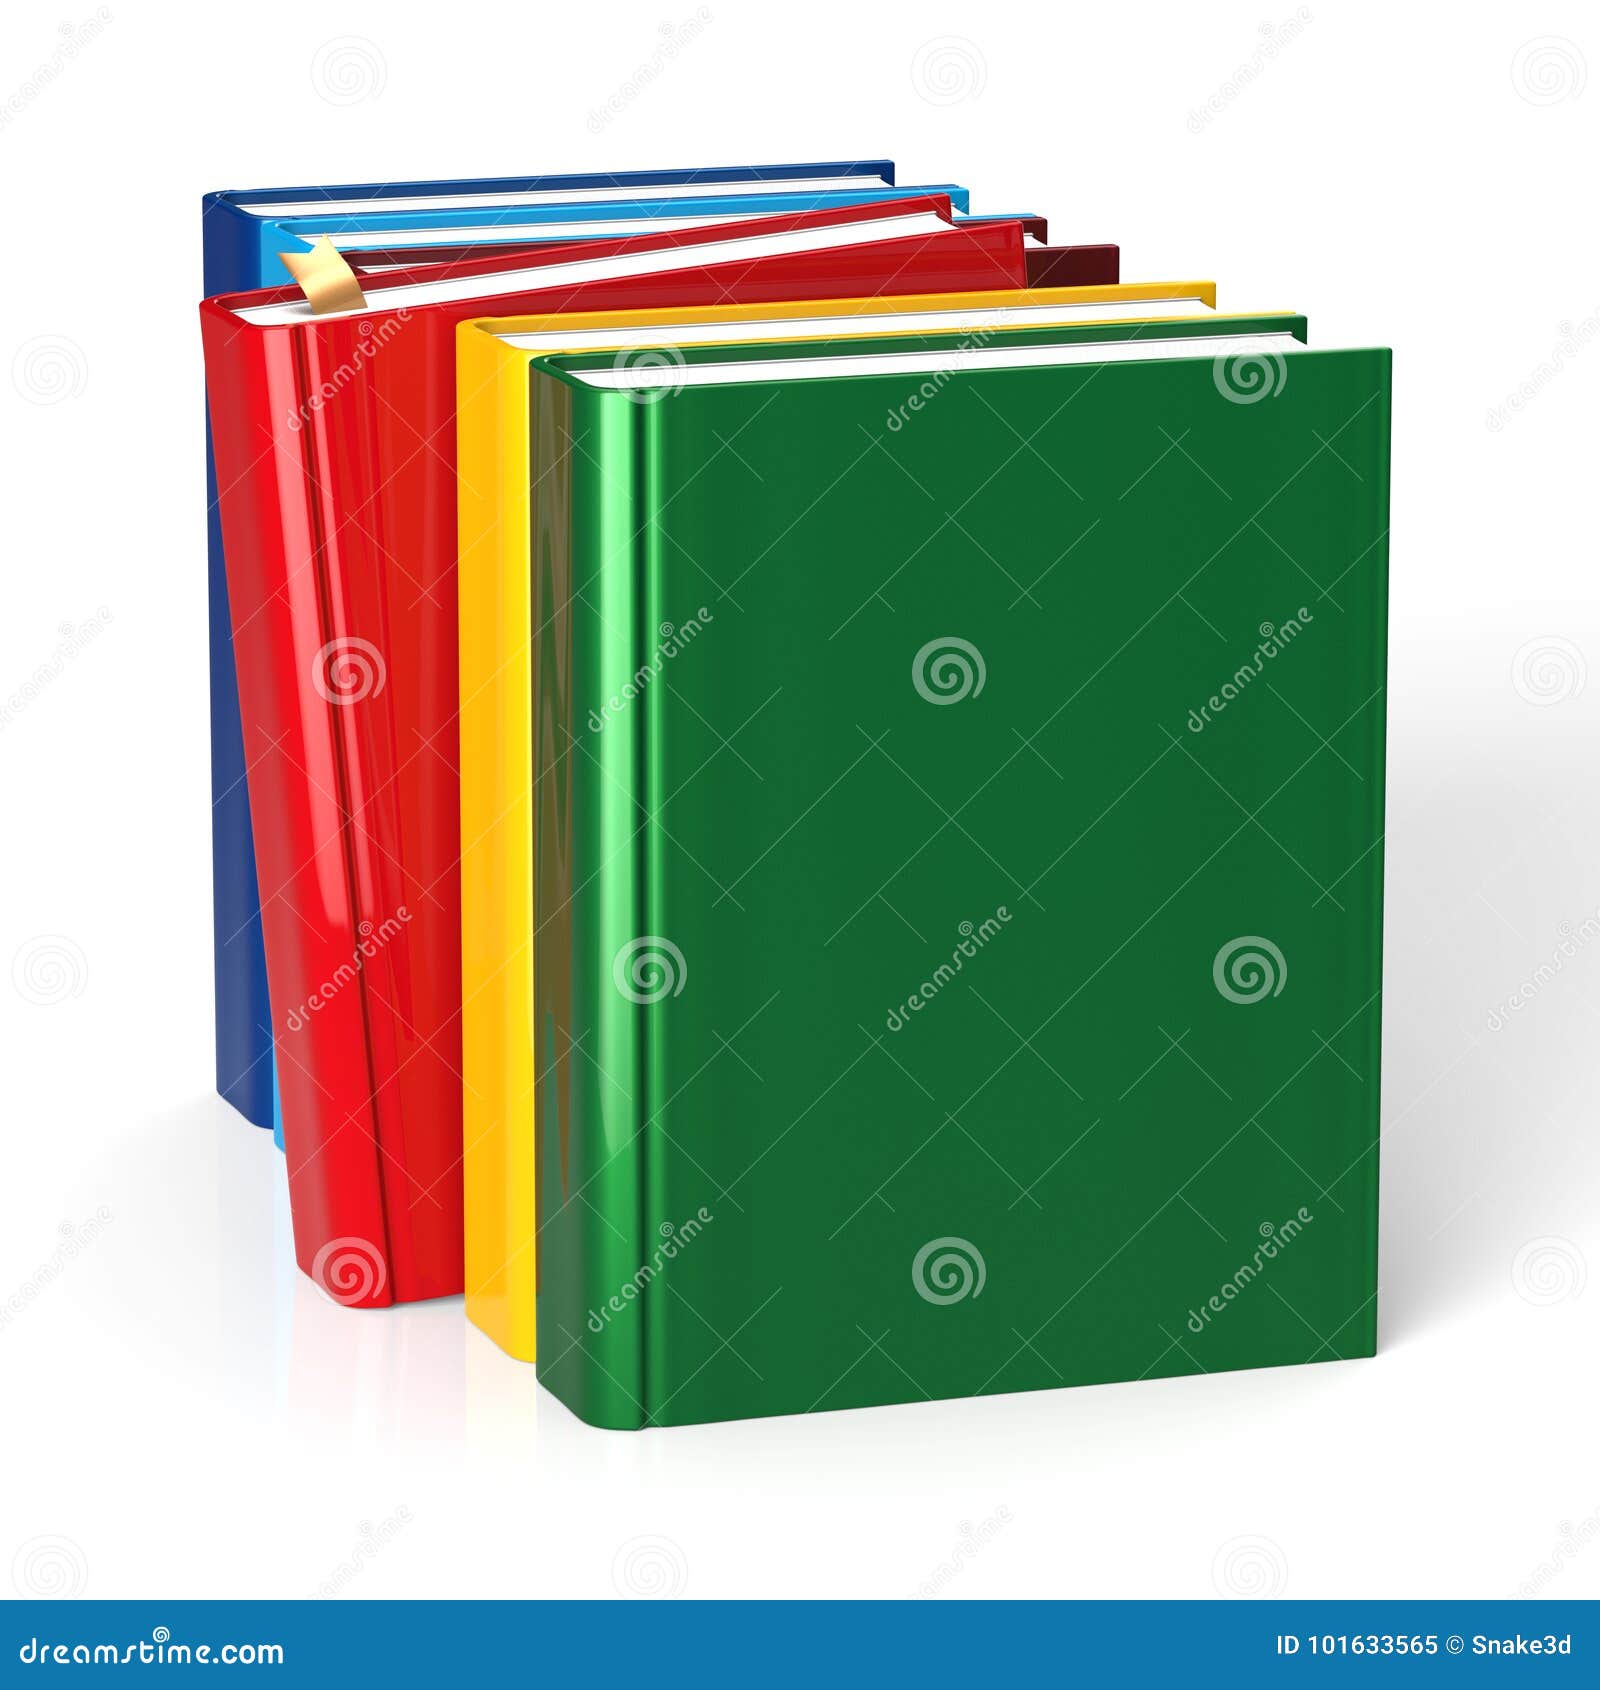 Books Textbook Selecting Red Blank Covers Raw Colorful Choice Stock ...